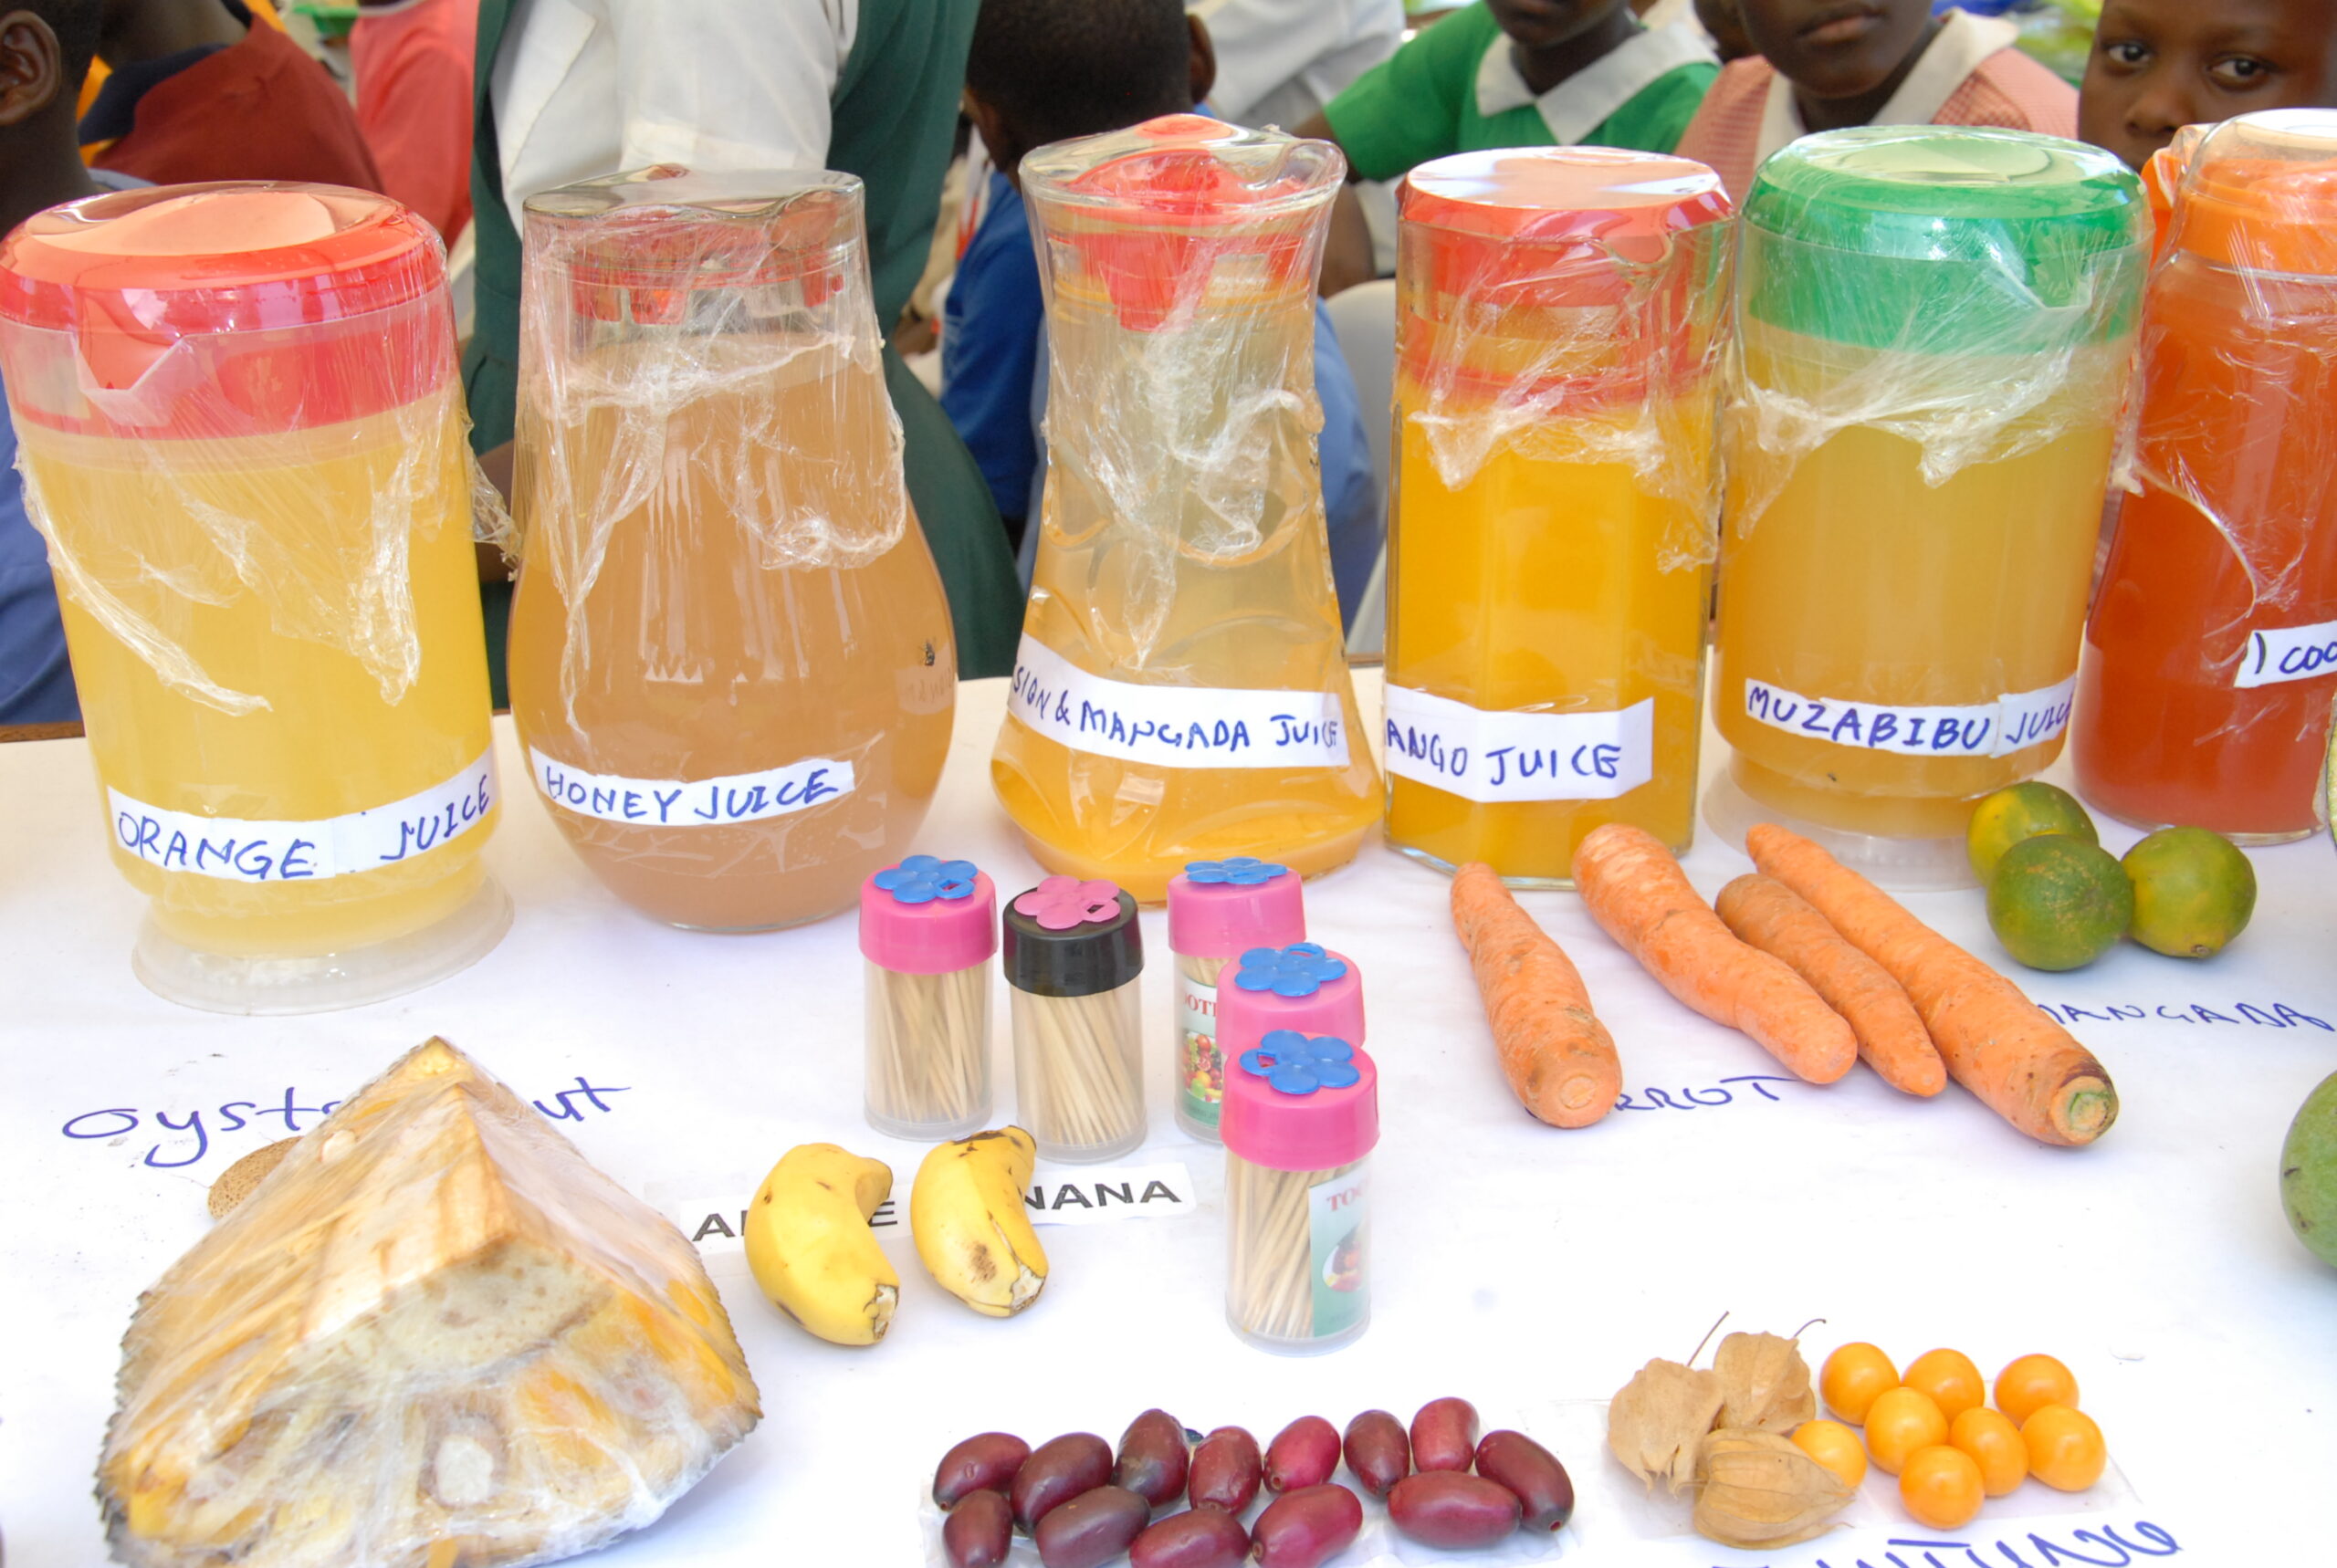 Promoting healthy diets from the bottom up in Uganda